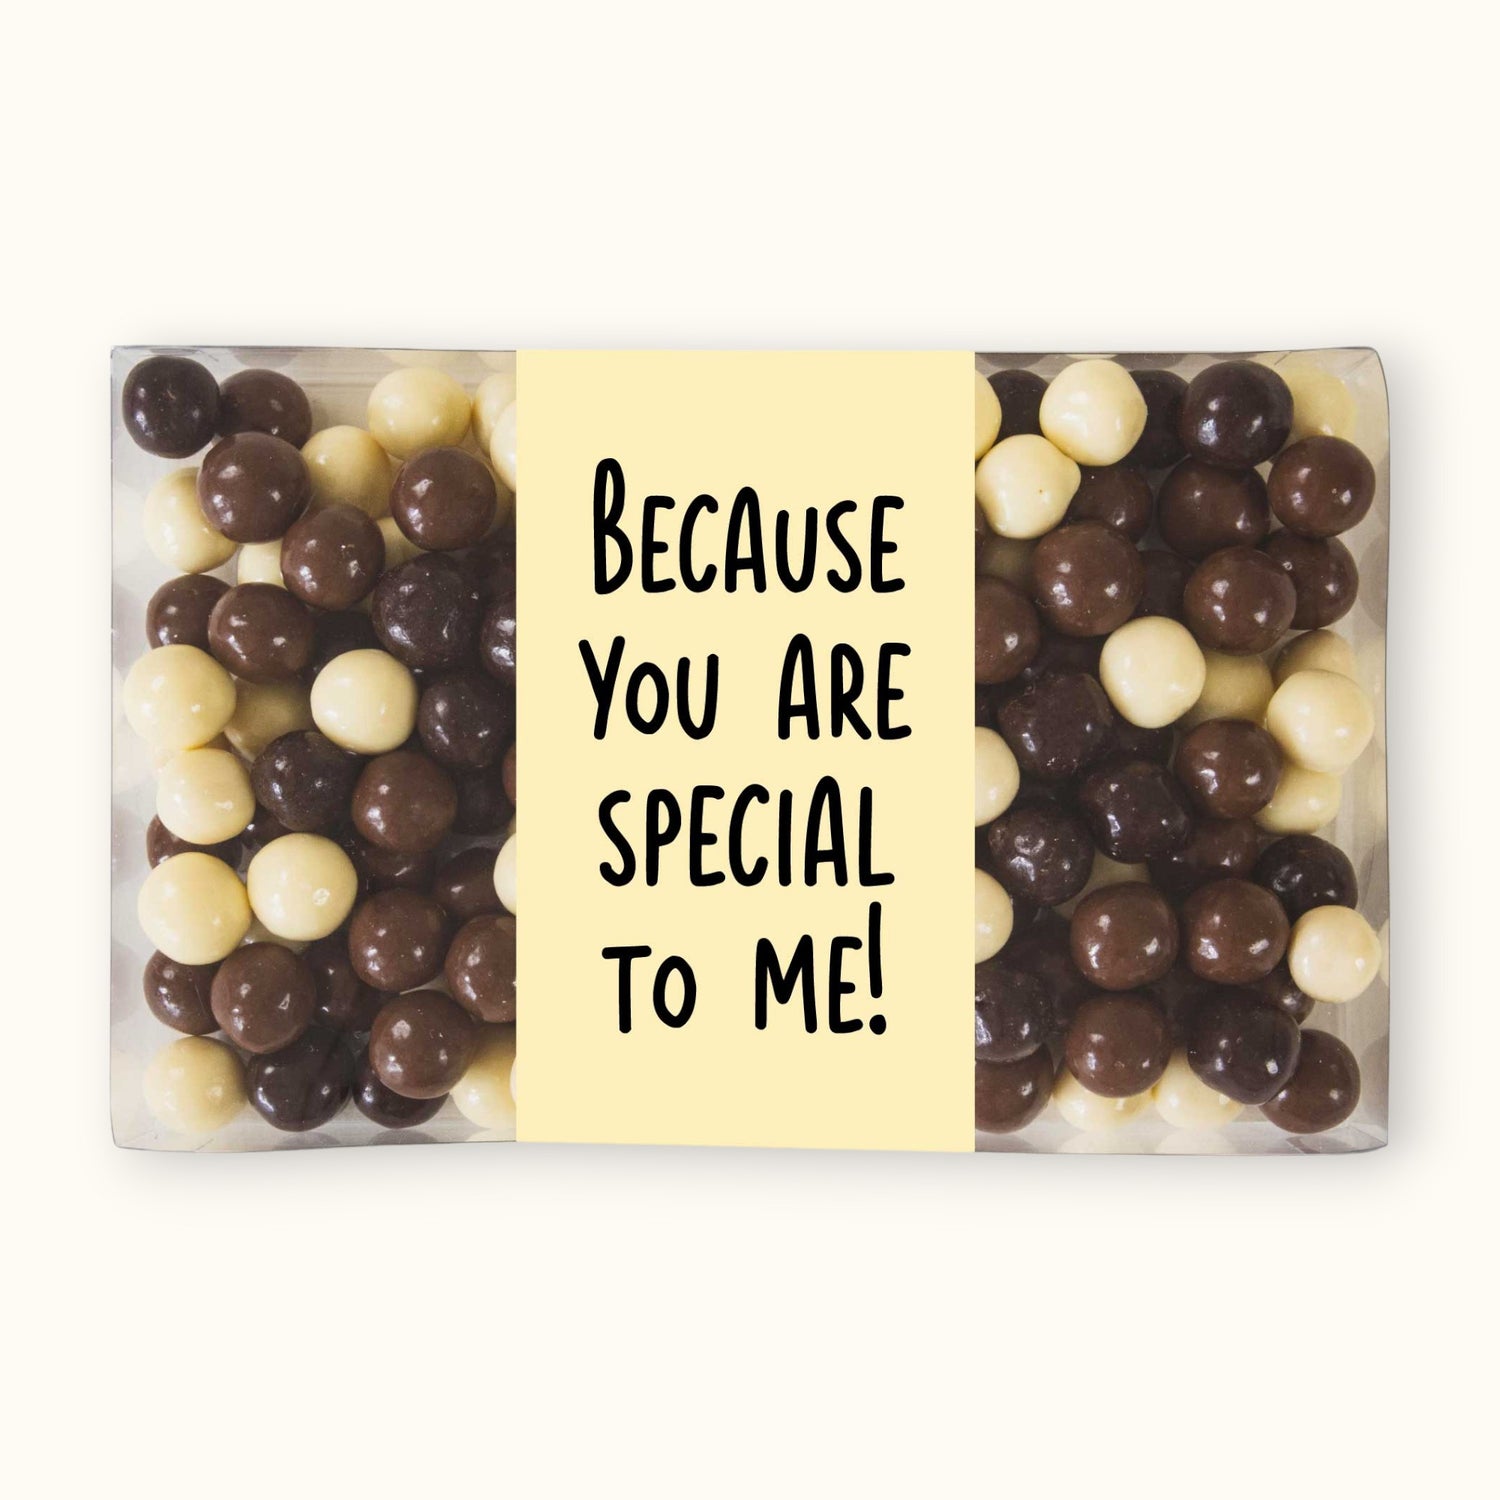 Doosje chocolade | Because you are special to me